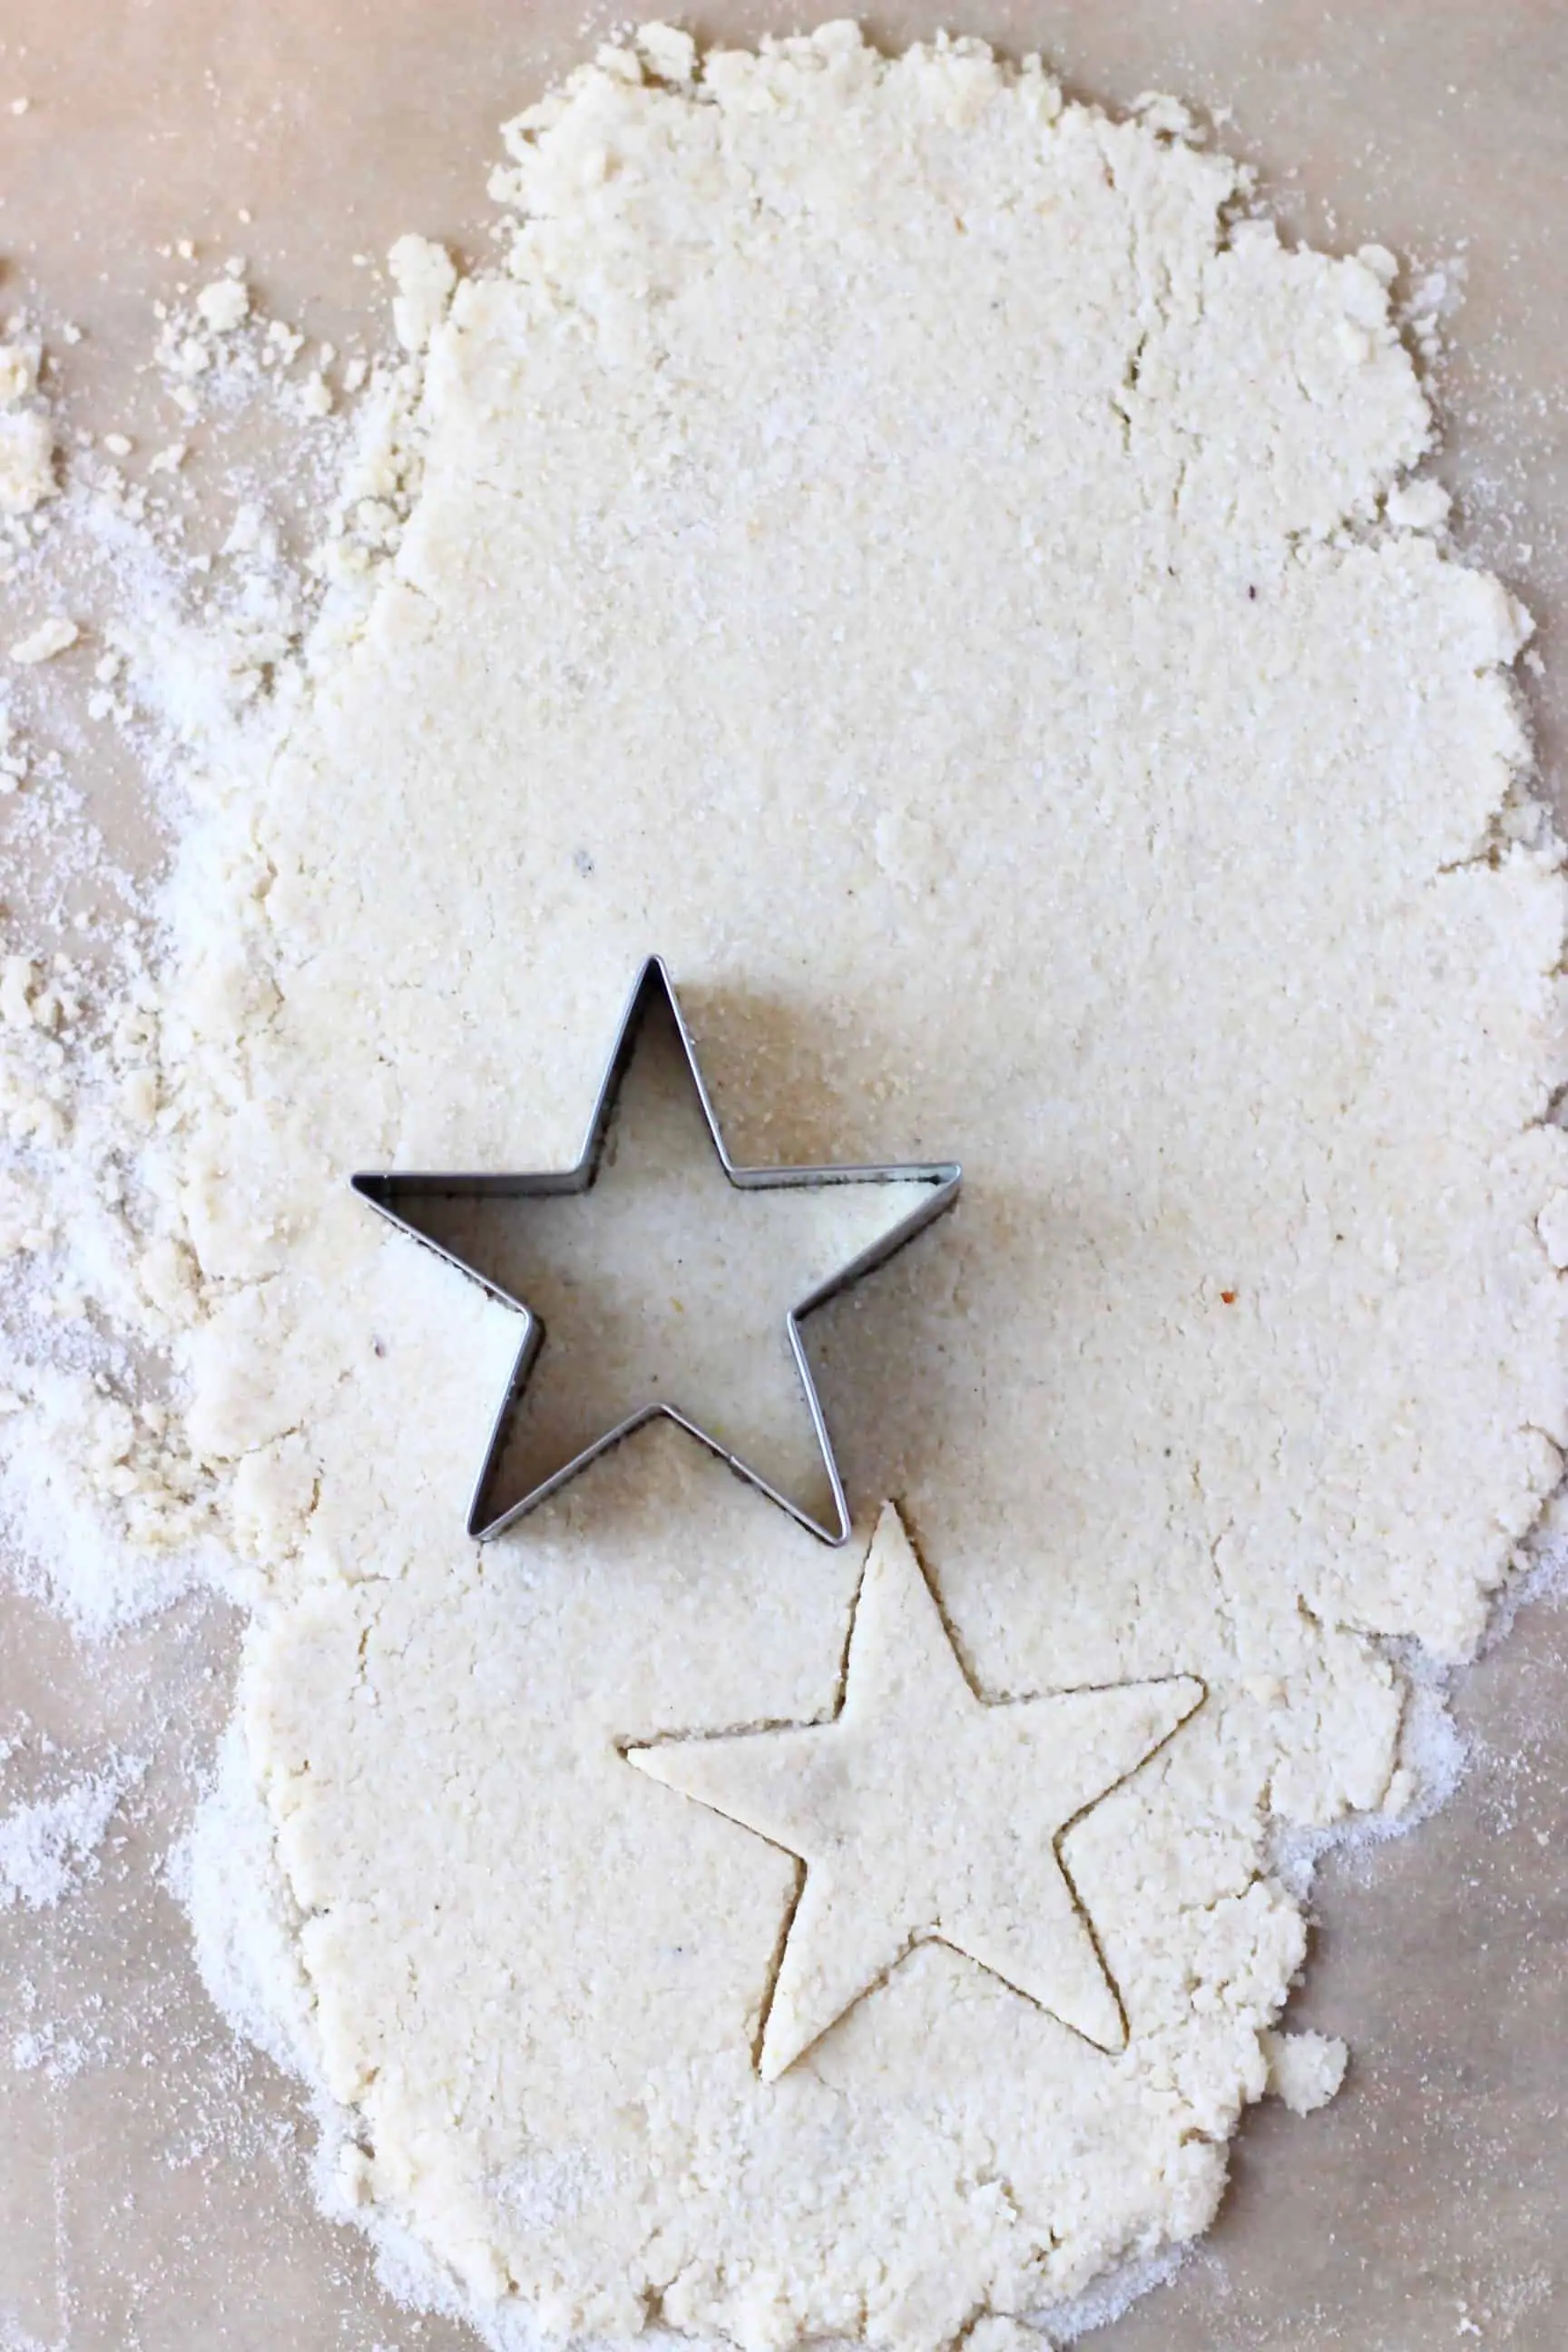 Gluten-free vegan pastry dough rolled out on a sheet of baking paper with a star-shaped cookie cutter on it